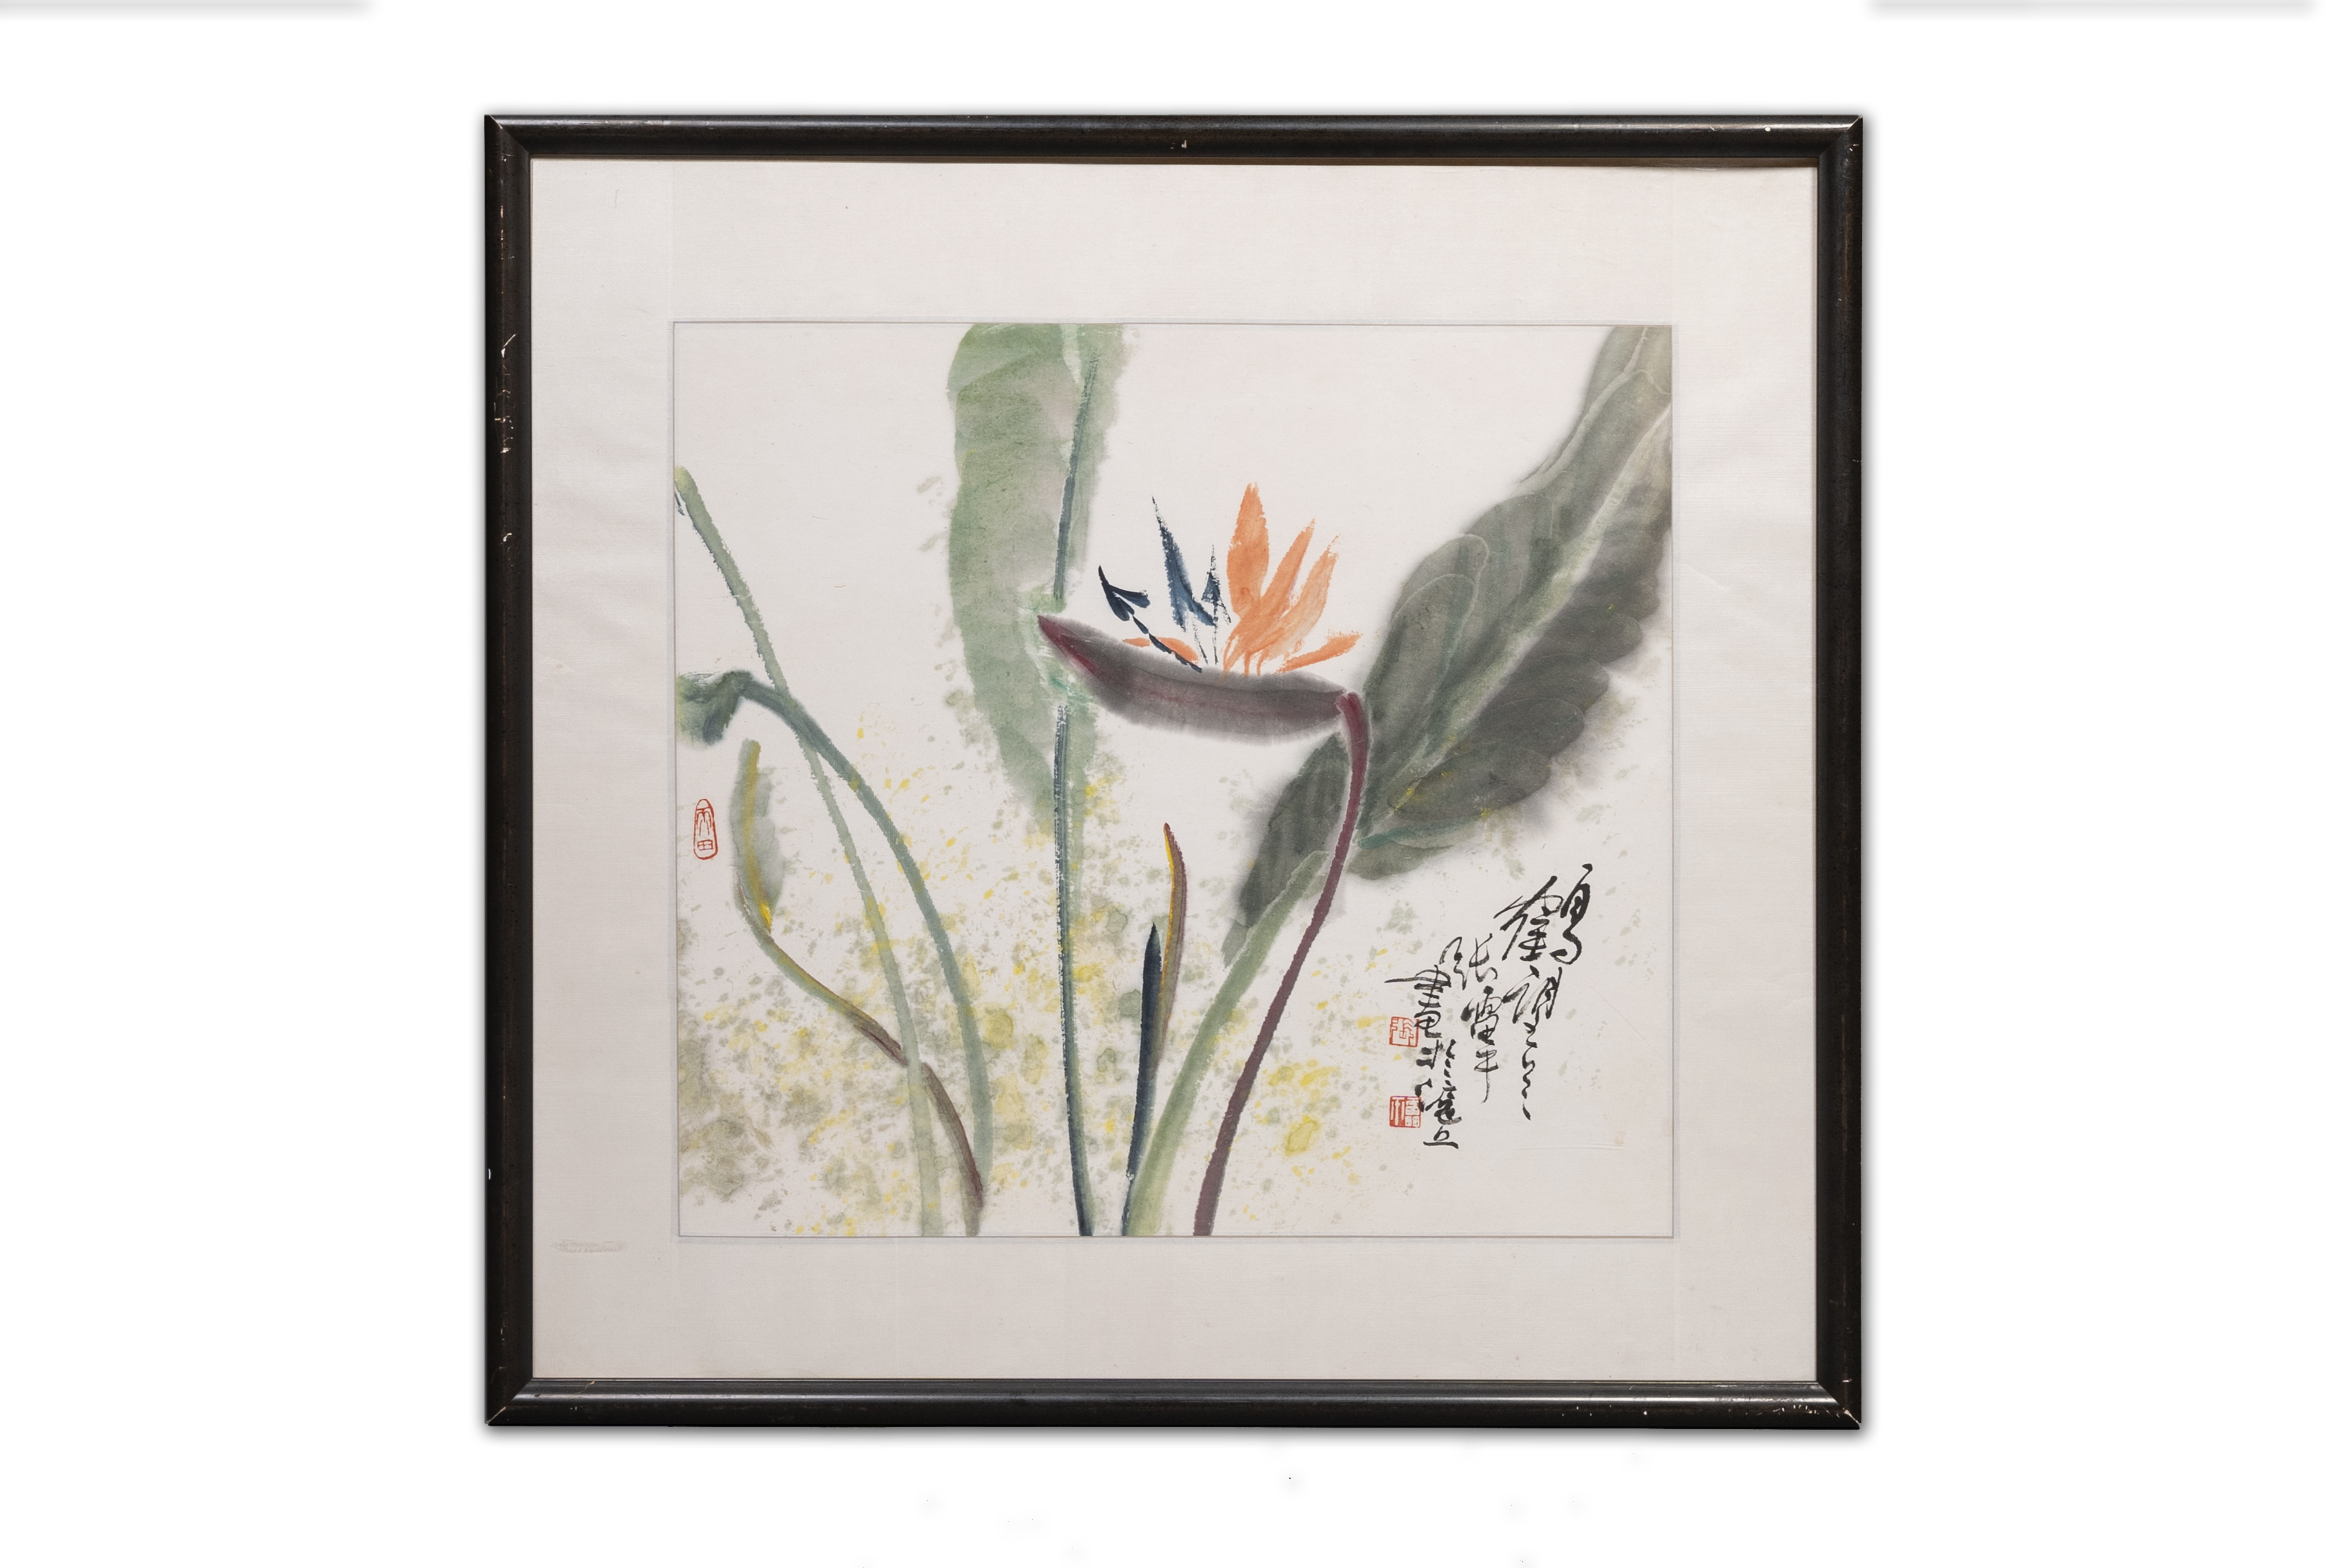 Zhang Leiping å¼µé›·å¹³ (1945): three various works, ink and color on paper, dated 1988 - Image 9 of 12